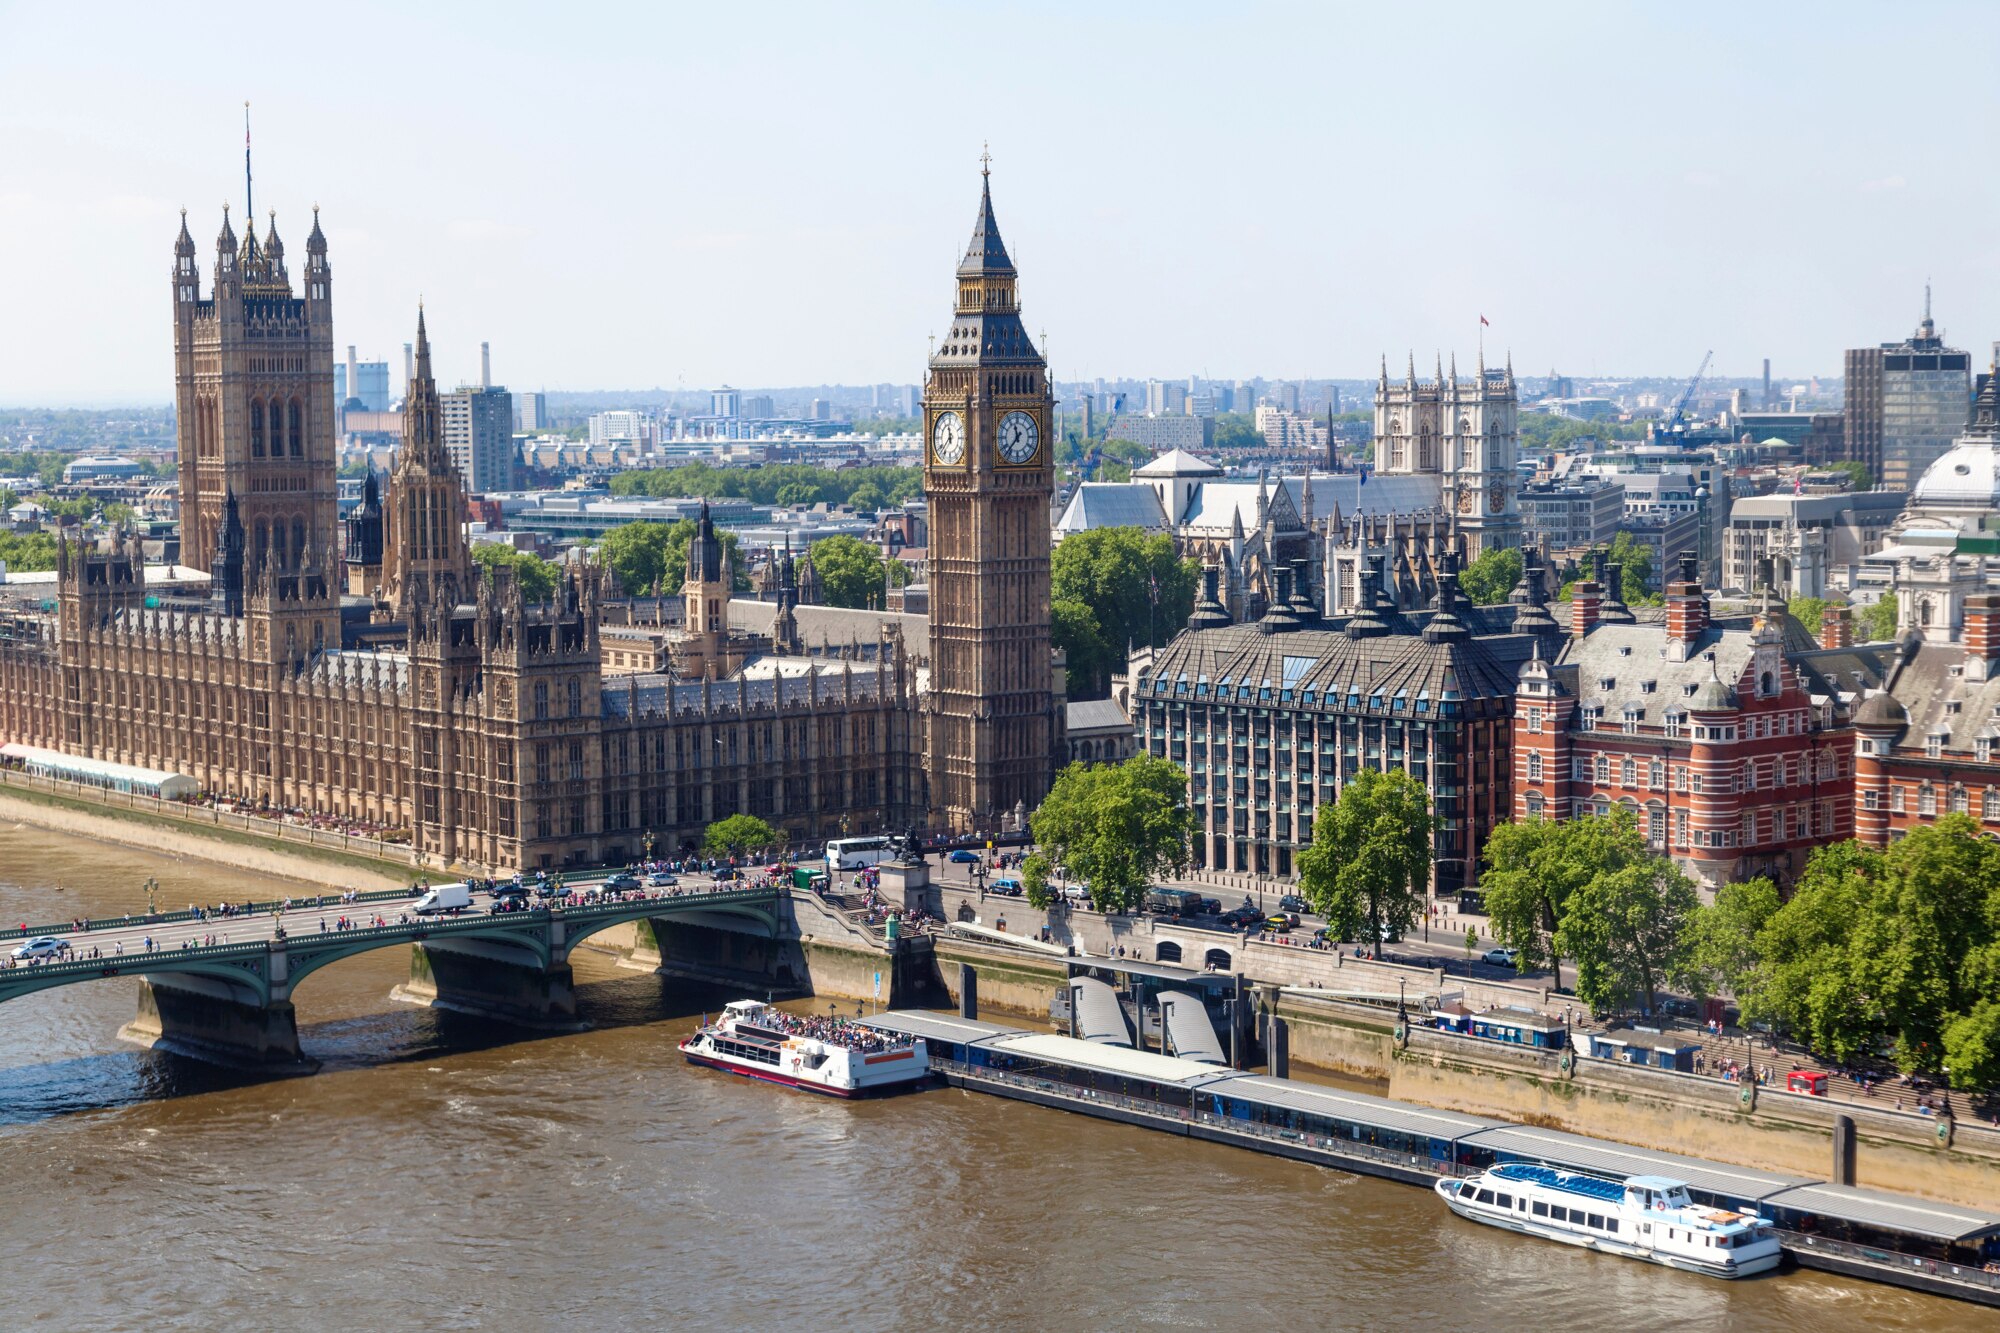 aerial view of London with the famous Big Ben and the Westminster Palace